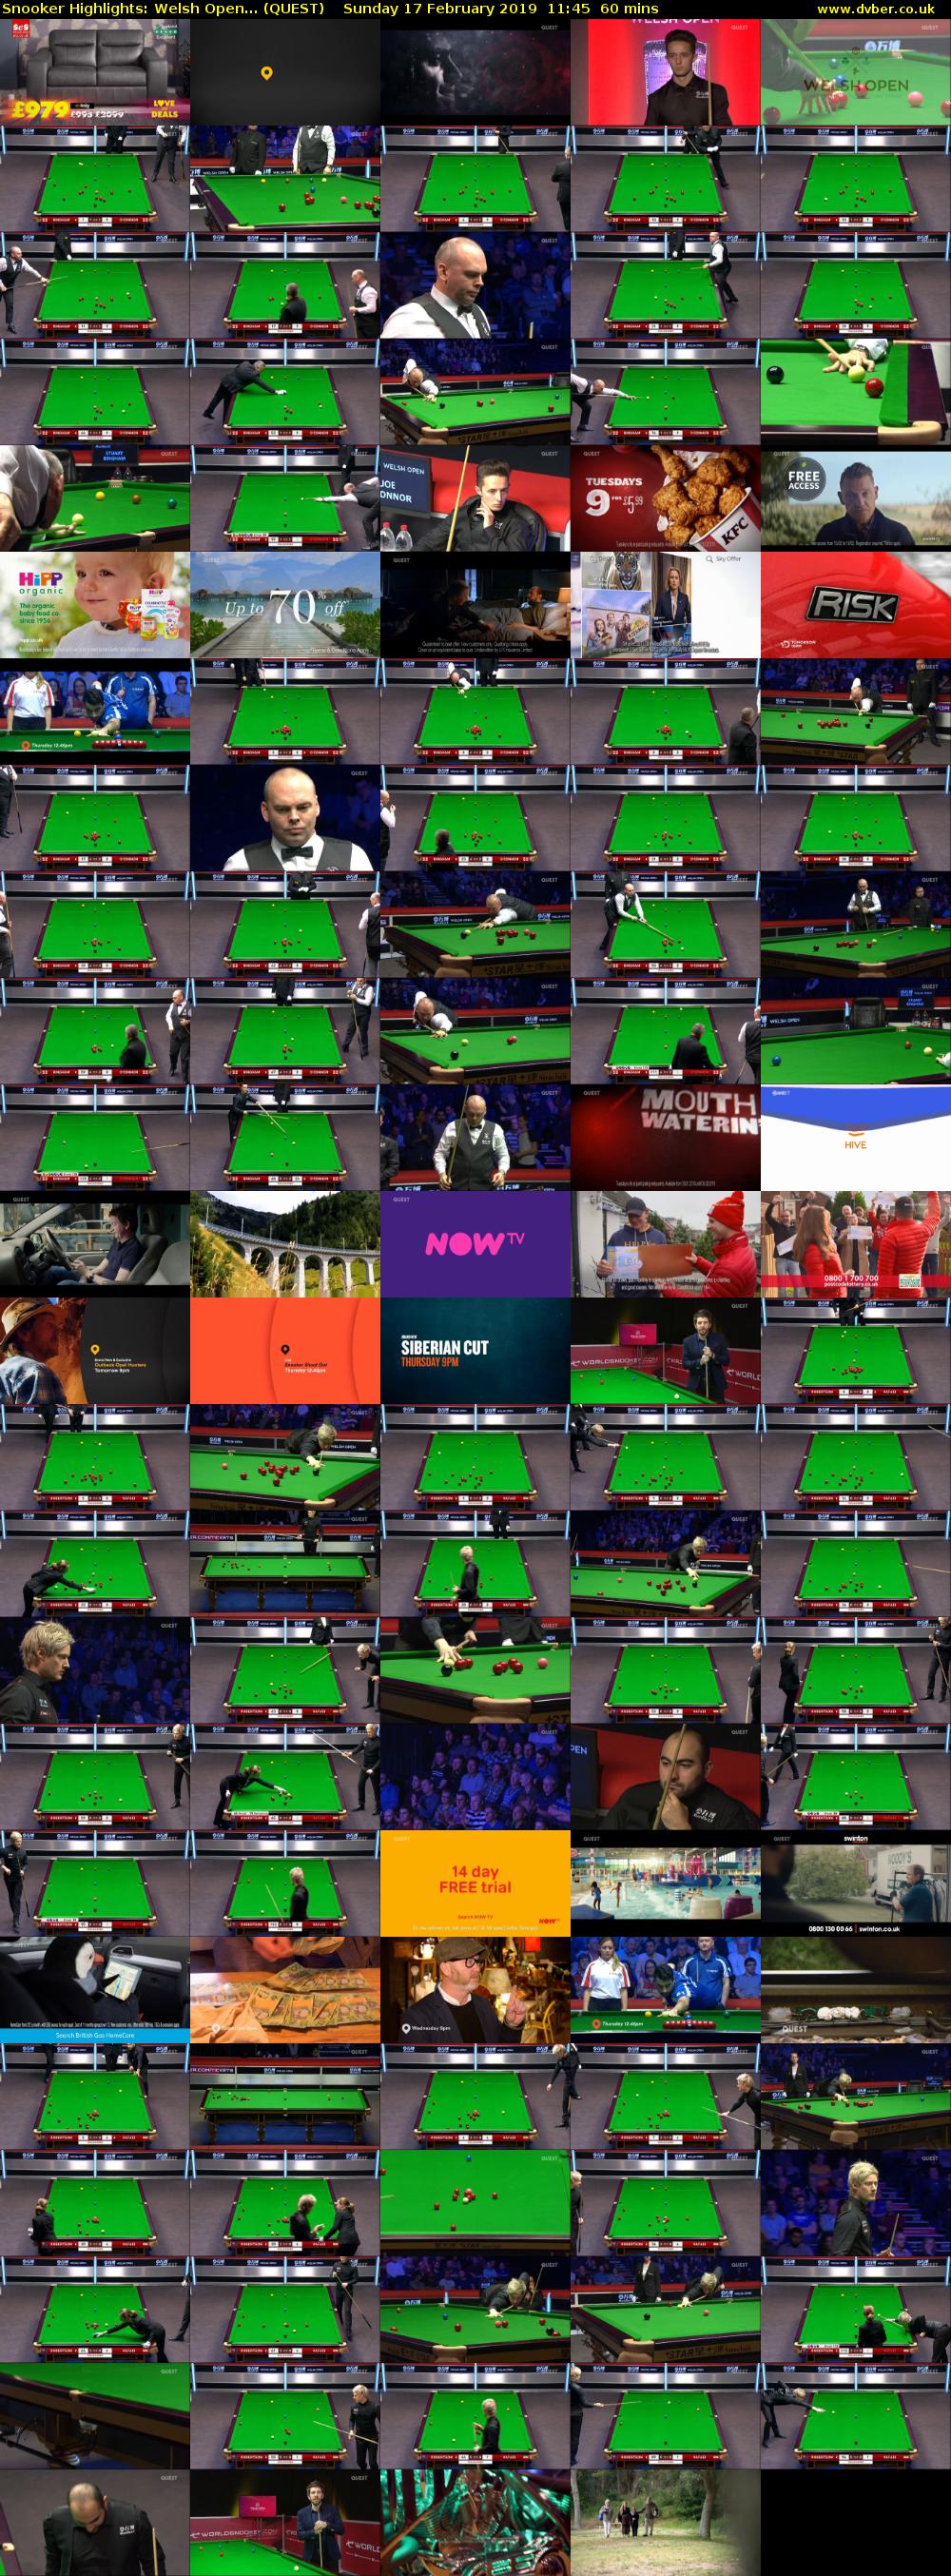 Snooker Highlights: Welsh Open... (QUEST) Sunday 17 February 2019 11:45 - 12:45